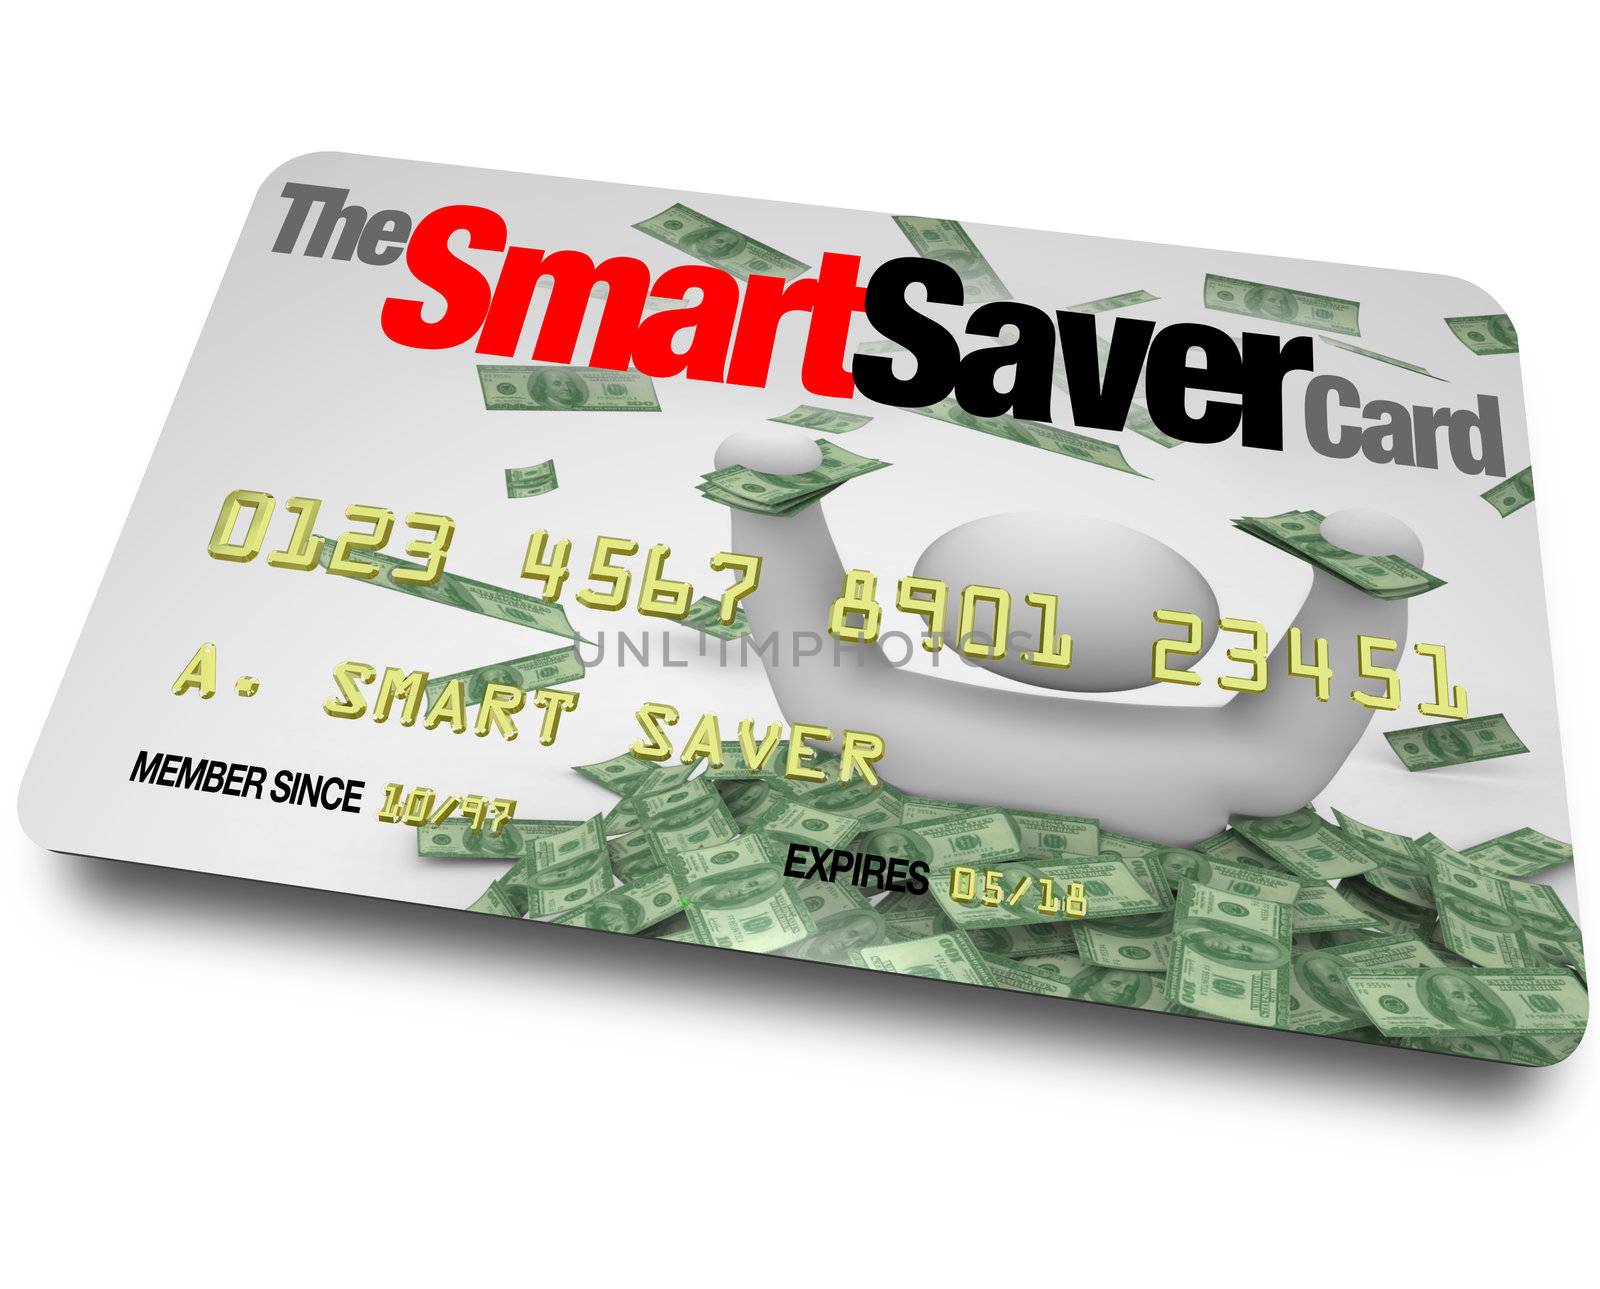 A credit card with the words Smart Saver Card which entitles you to great savings, discounts and cheap prices on merchandise you want